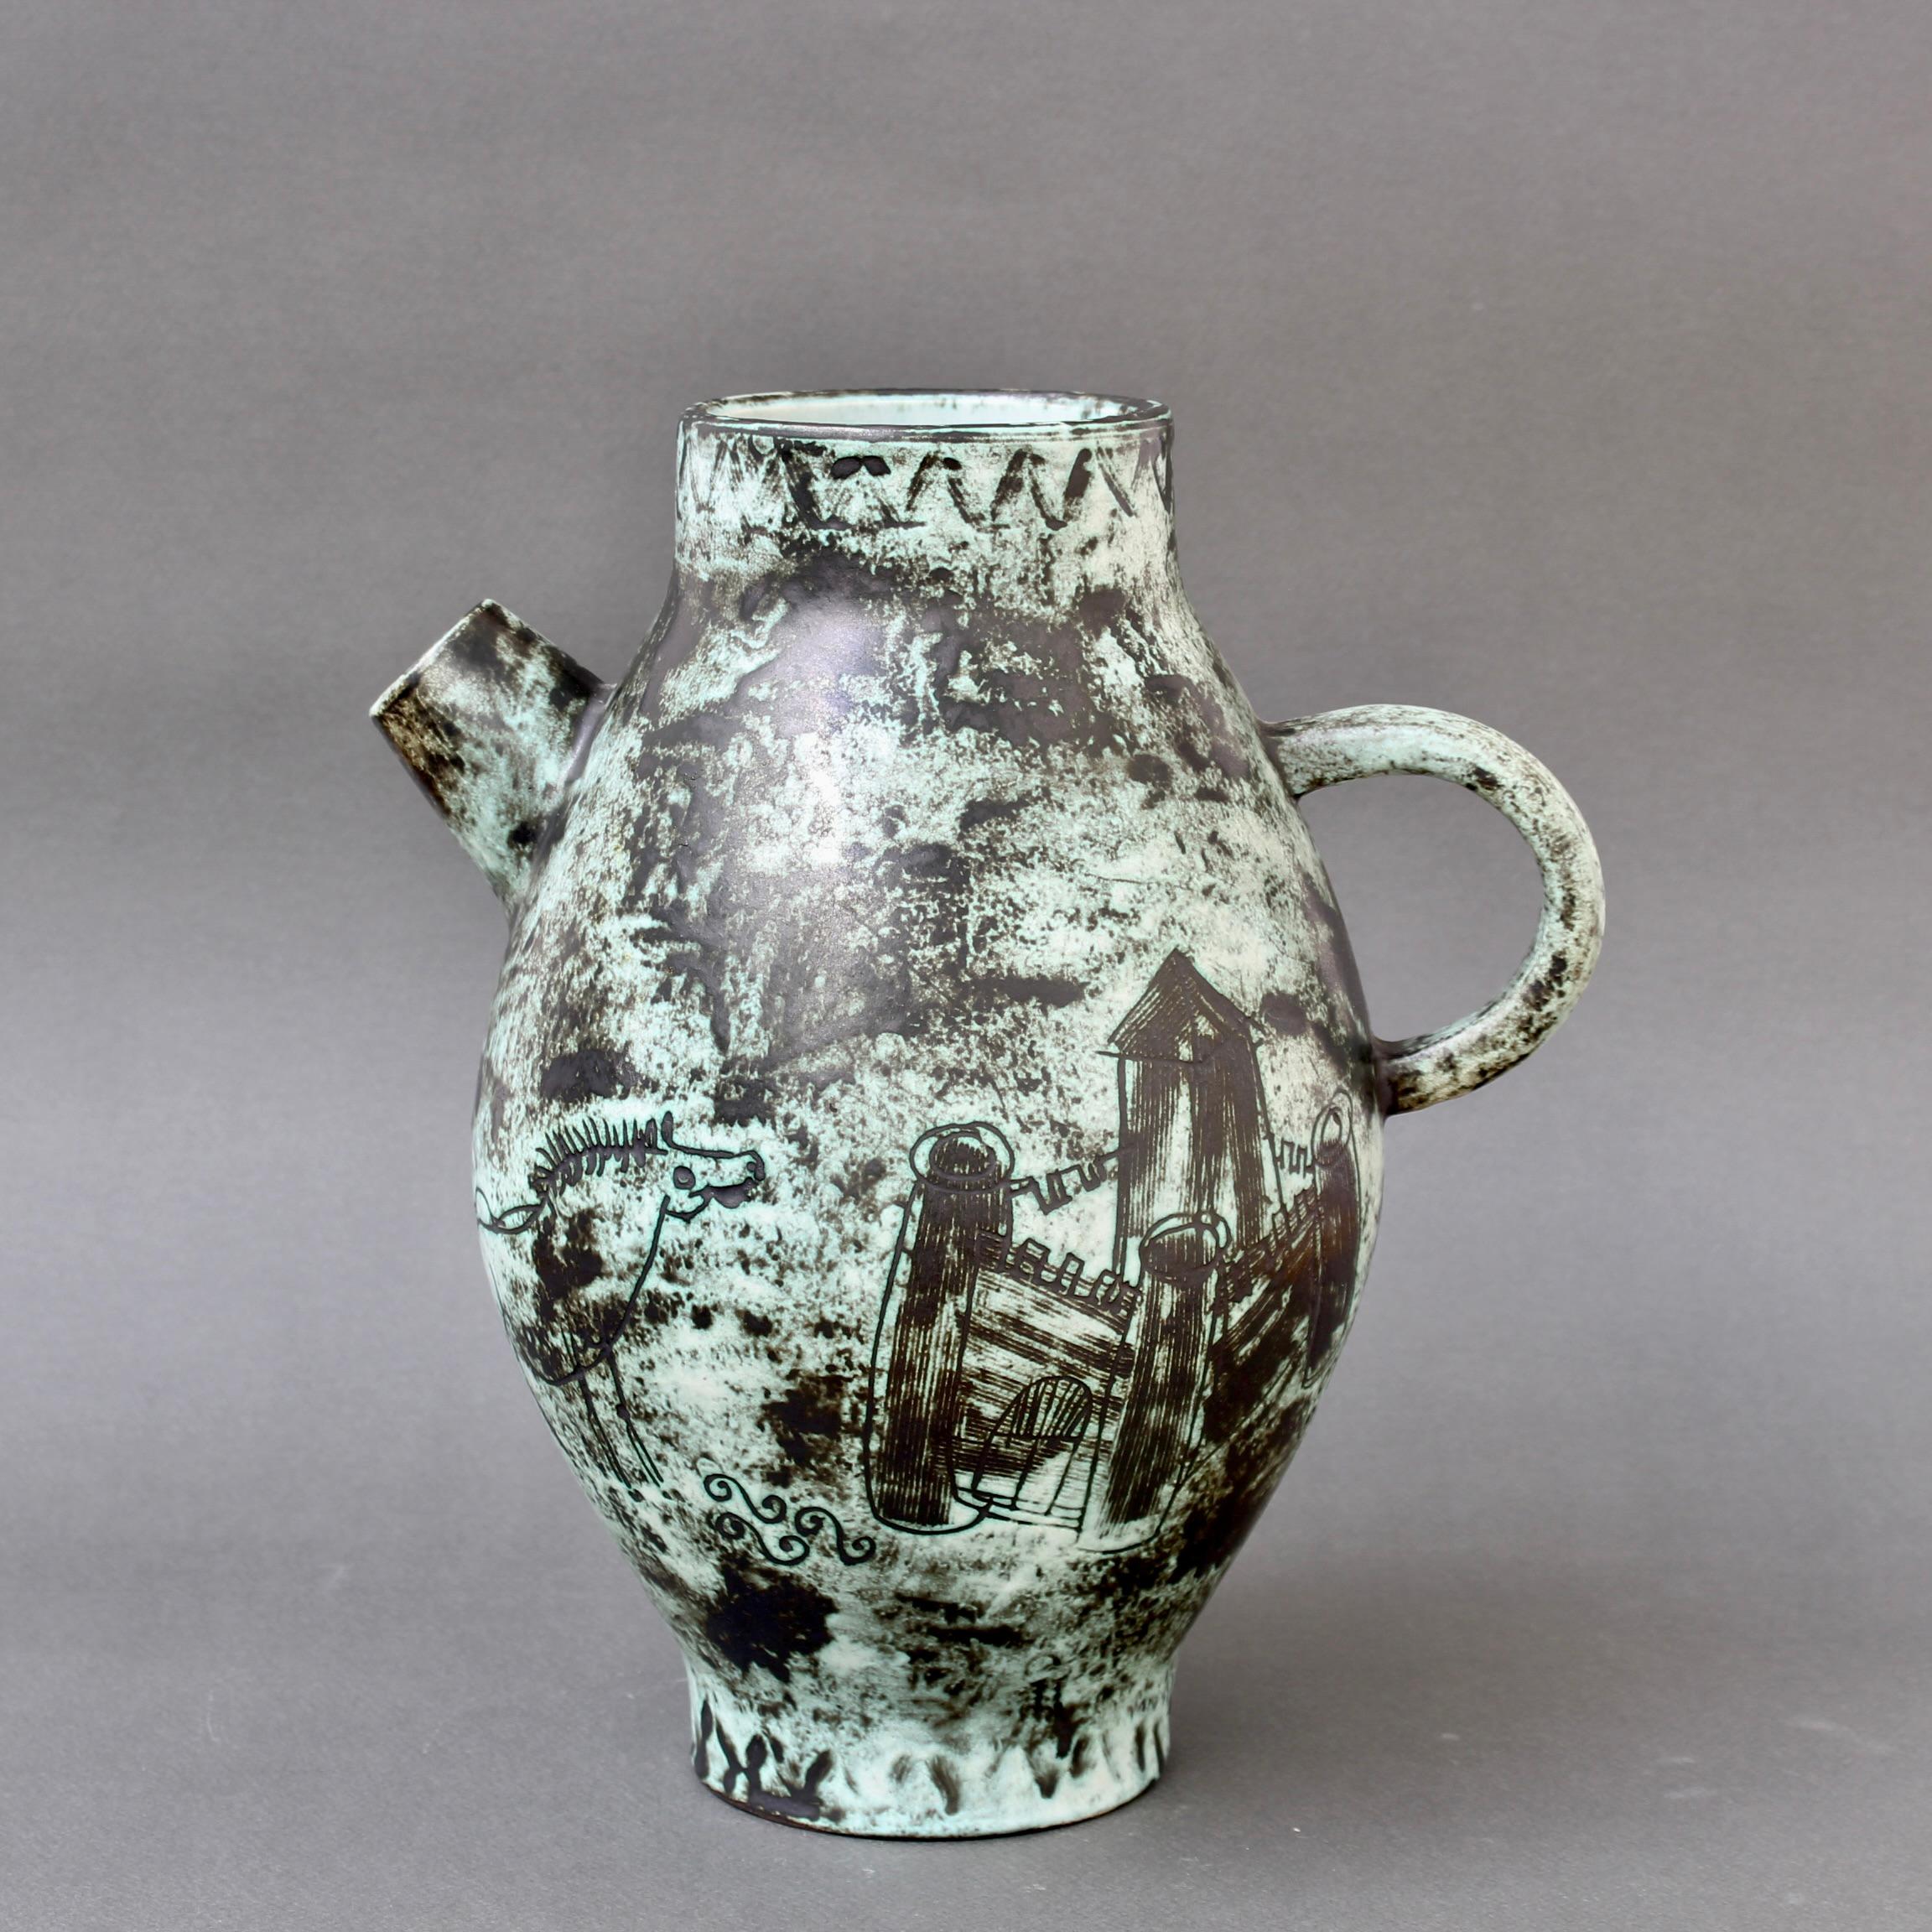 Vintage French ceramic vase by Jacques Blin (circa 1950s). This elegant piece has Blin's trademark cloudy glaze with castle and duelling knights motif. The incised decoration also includes images of an ancient catapult weapon and a horse. This is a